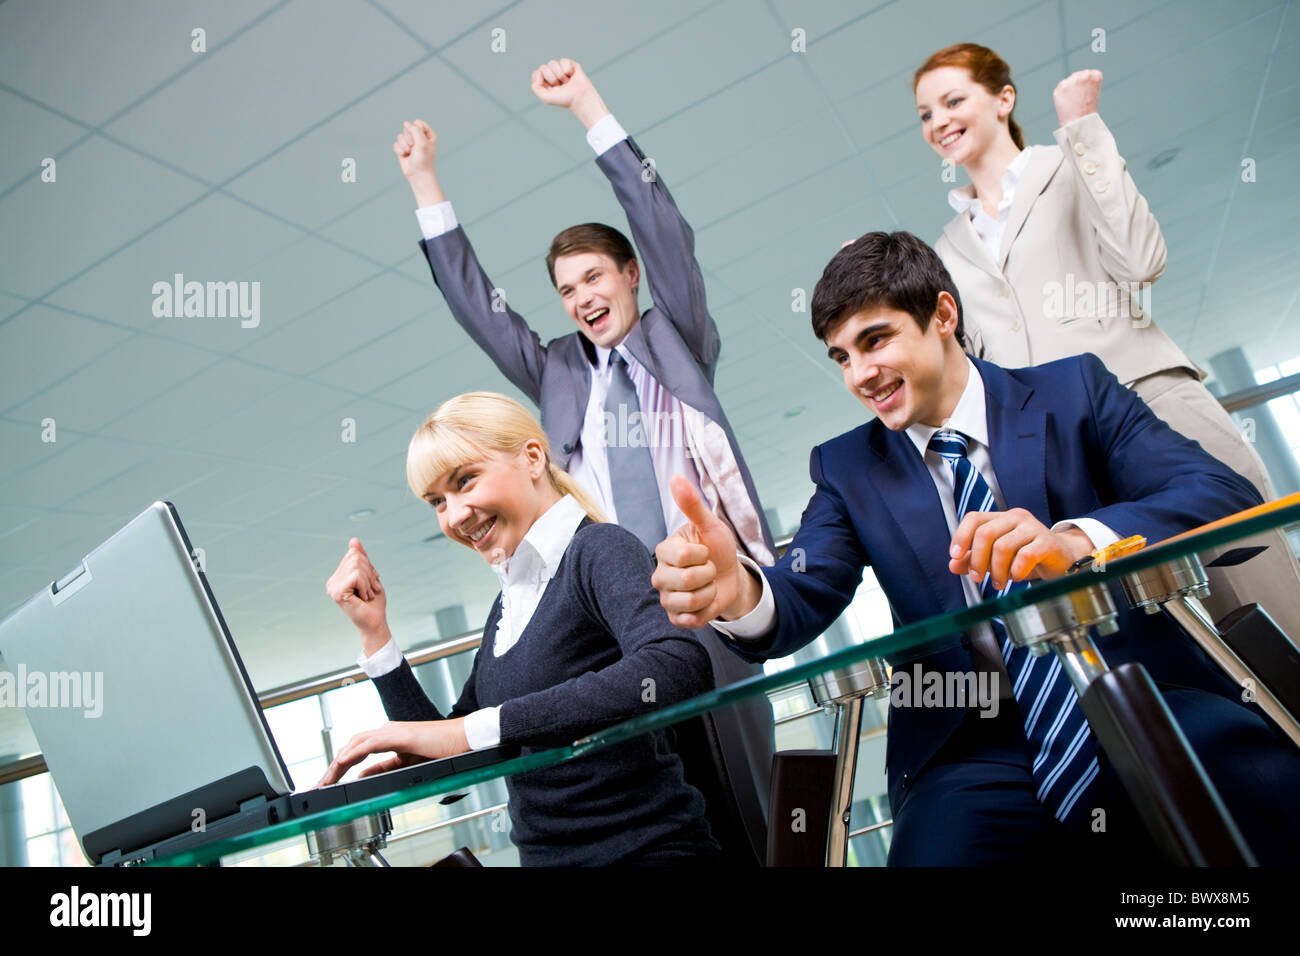 Group of co-workers looking at laptop monitor with expression of gladness Stock Photo